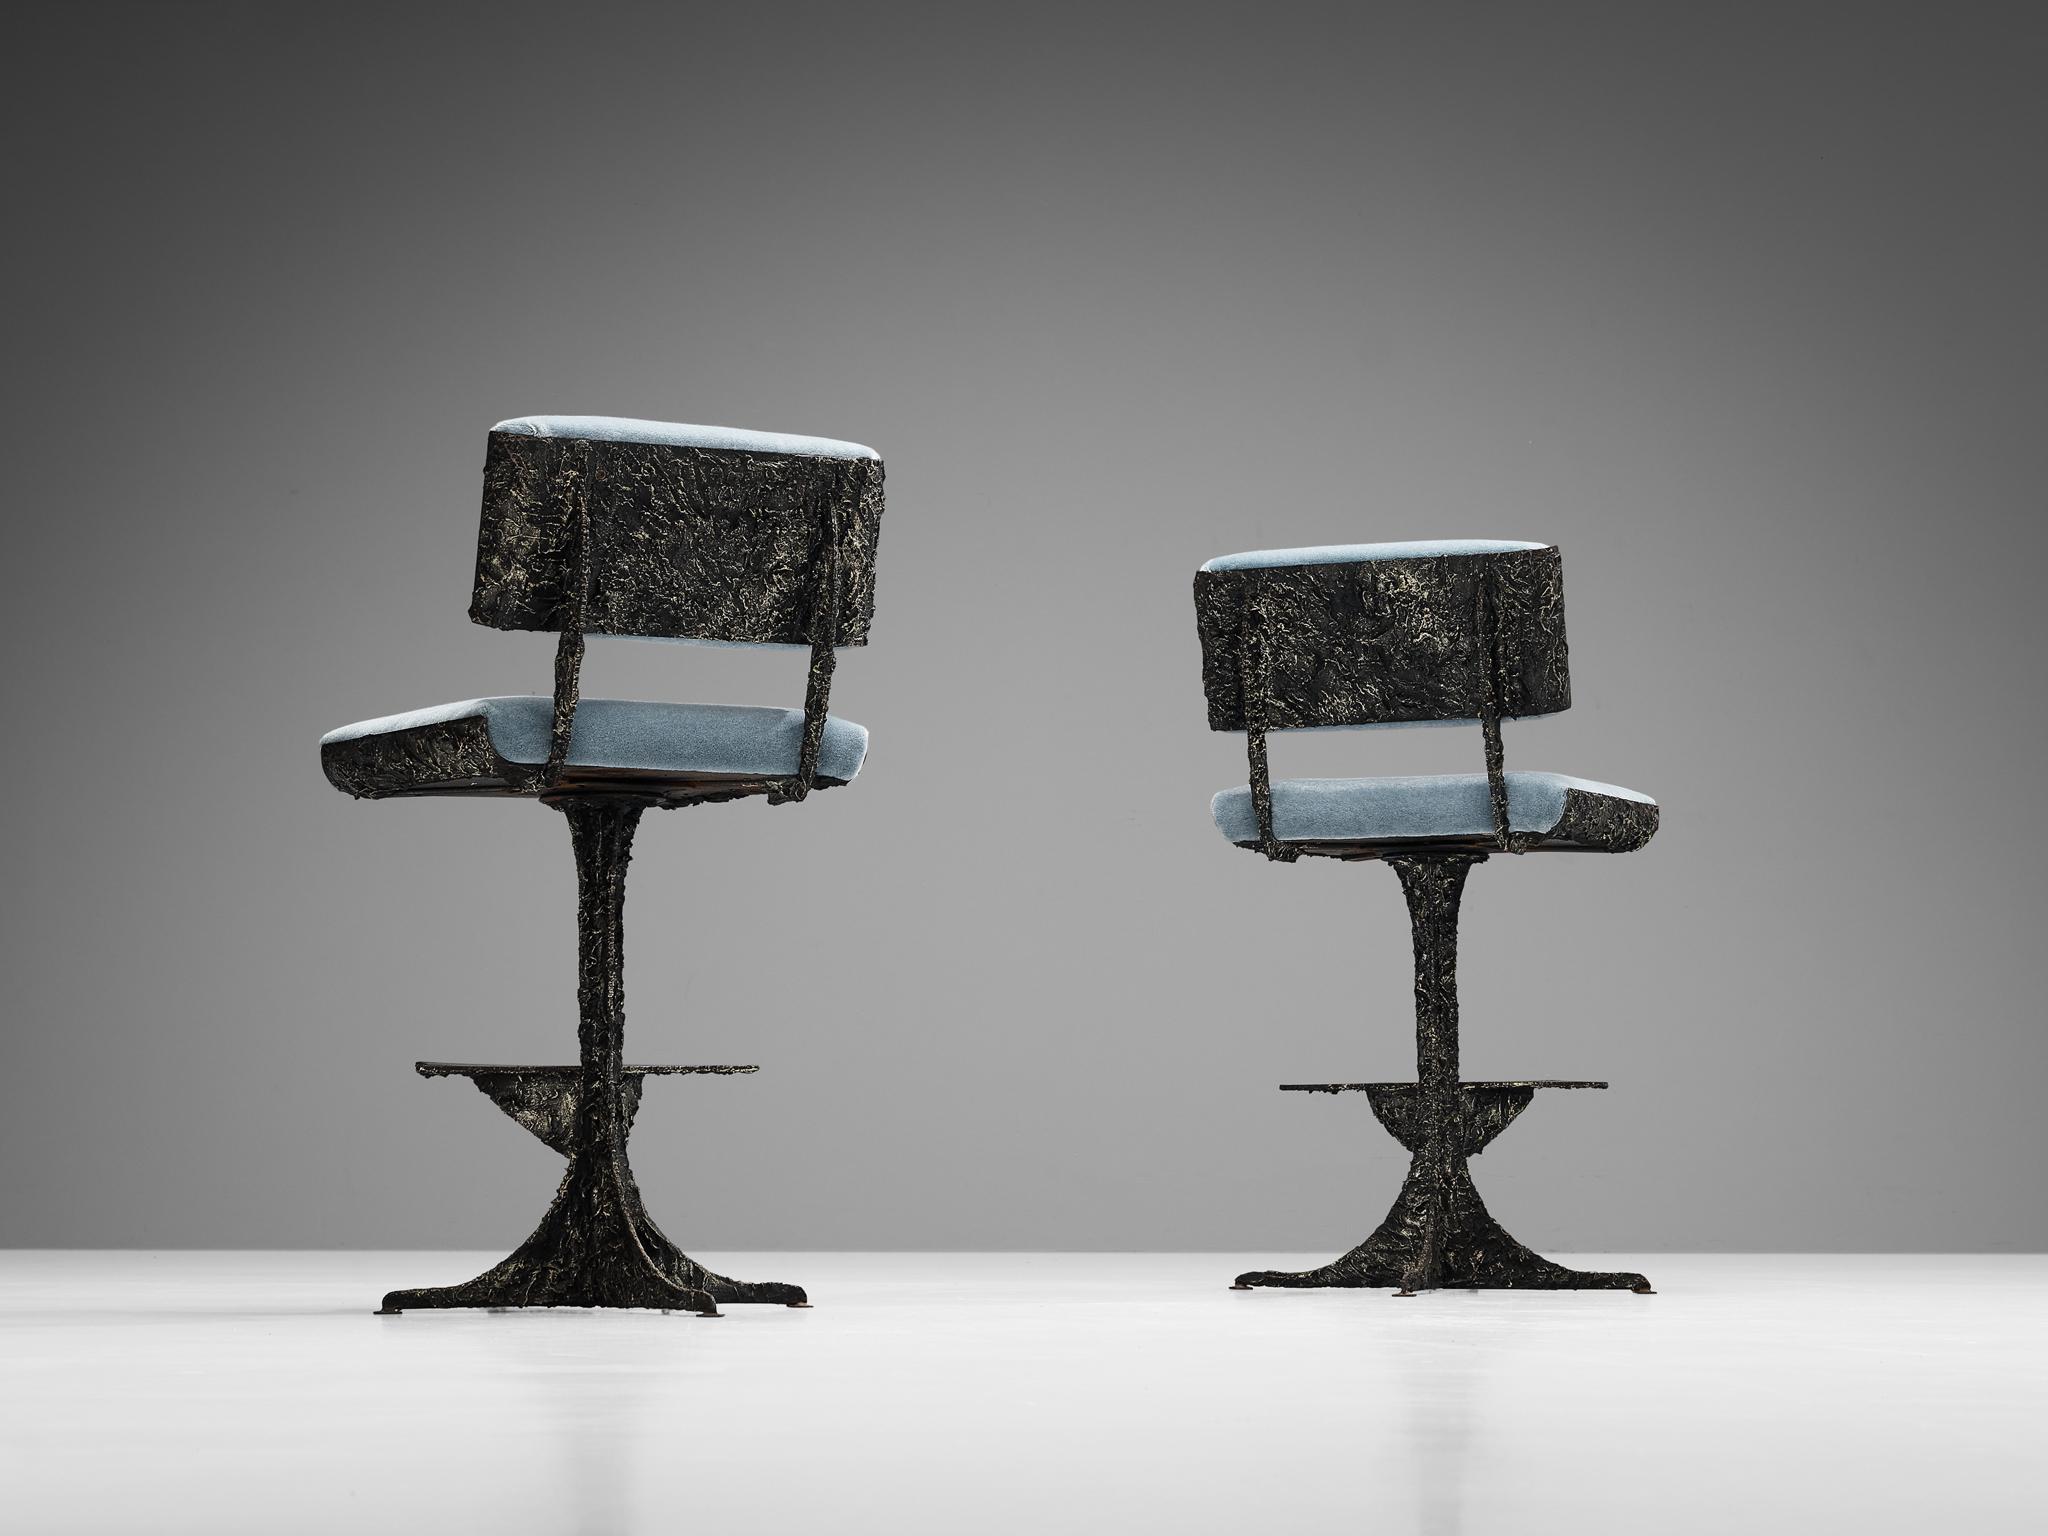 Paul Evans for Directional, pair of barstools from the Bronze series, epoxy bronzed resin over steel, reupholstered mohair, United States, circa 1975

This rare pair of swivel barstools is designed by Paul Evans for Directional. Evans employed the